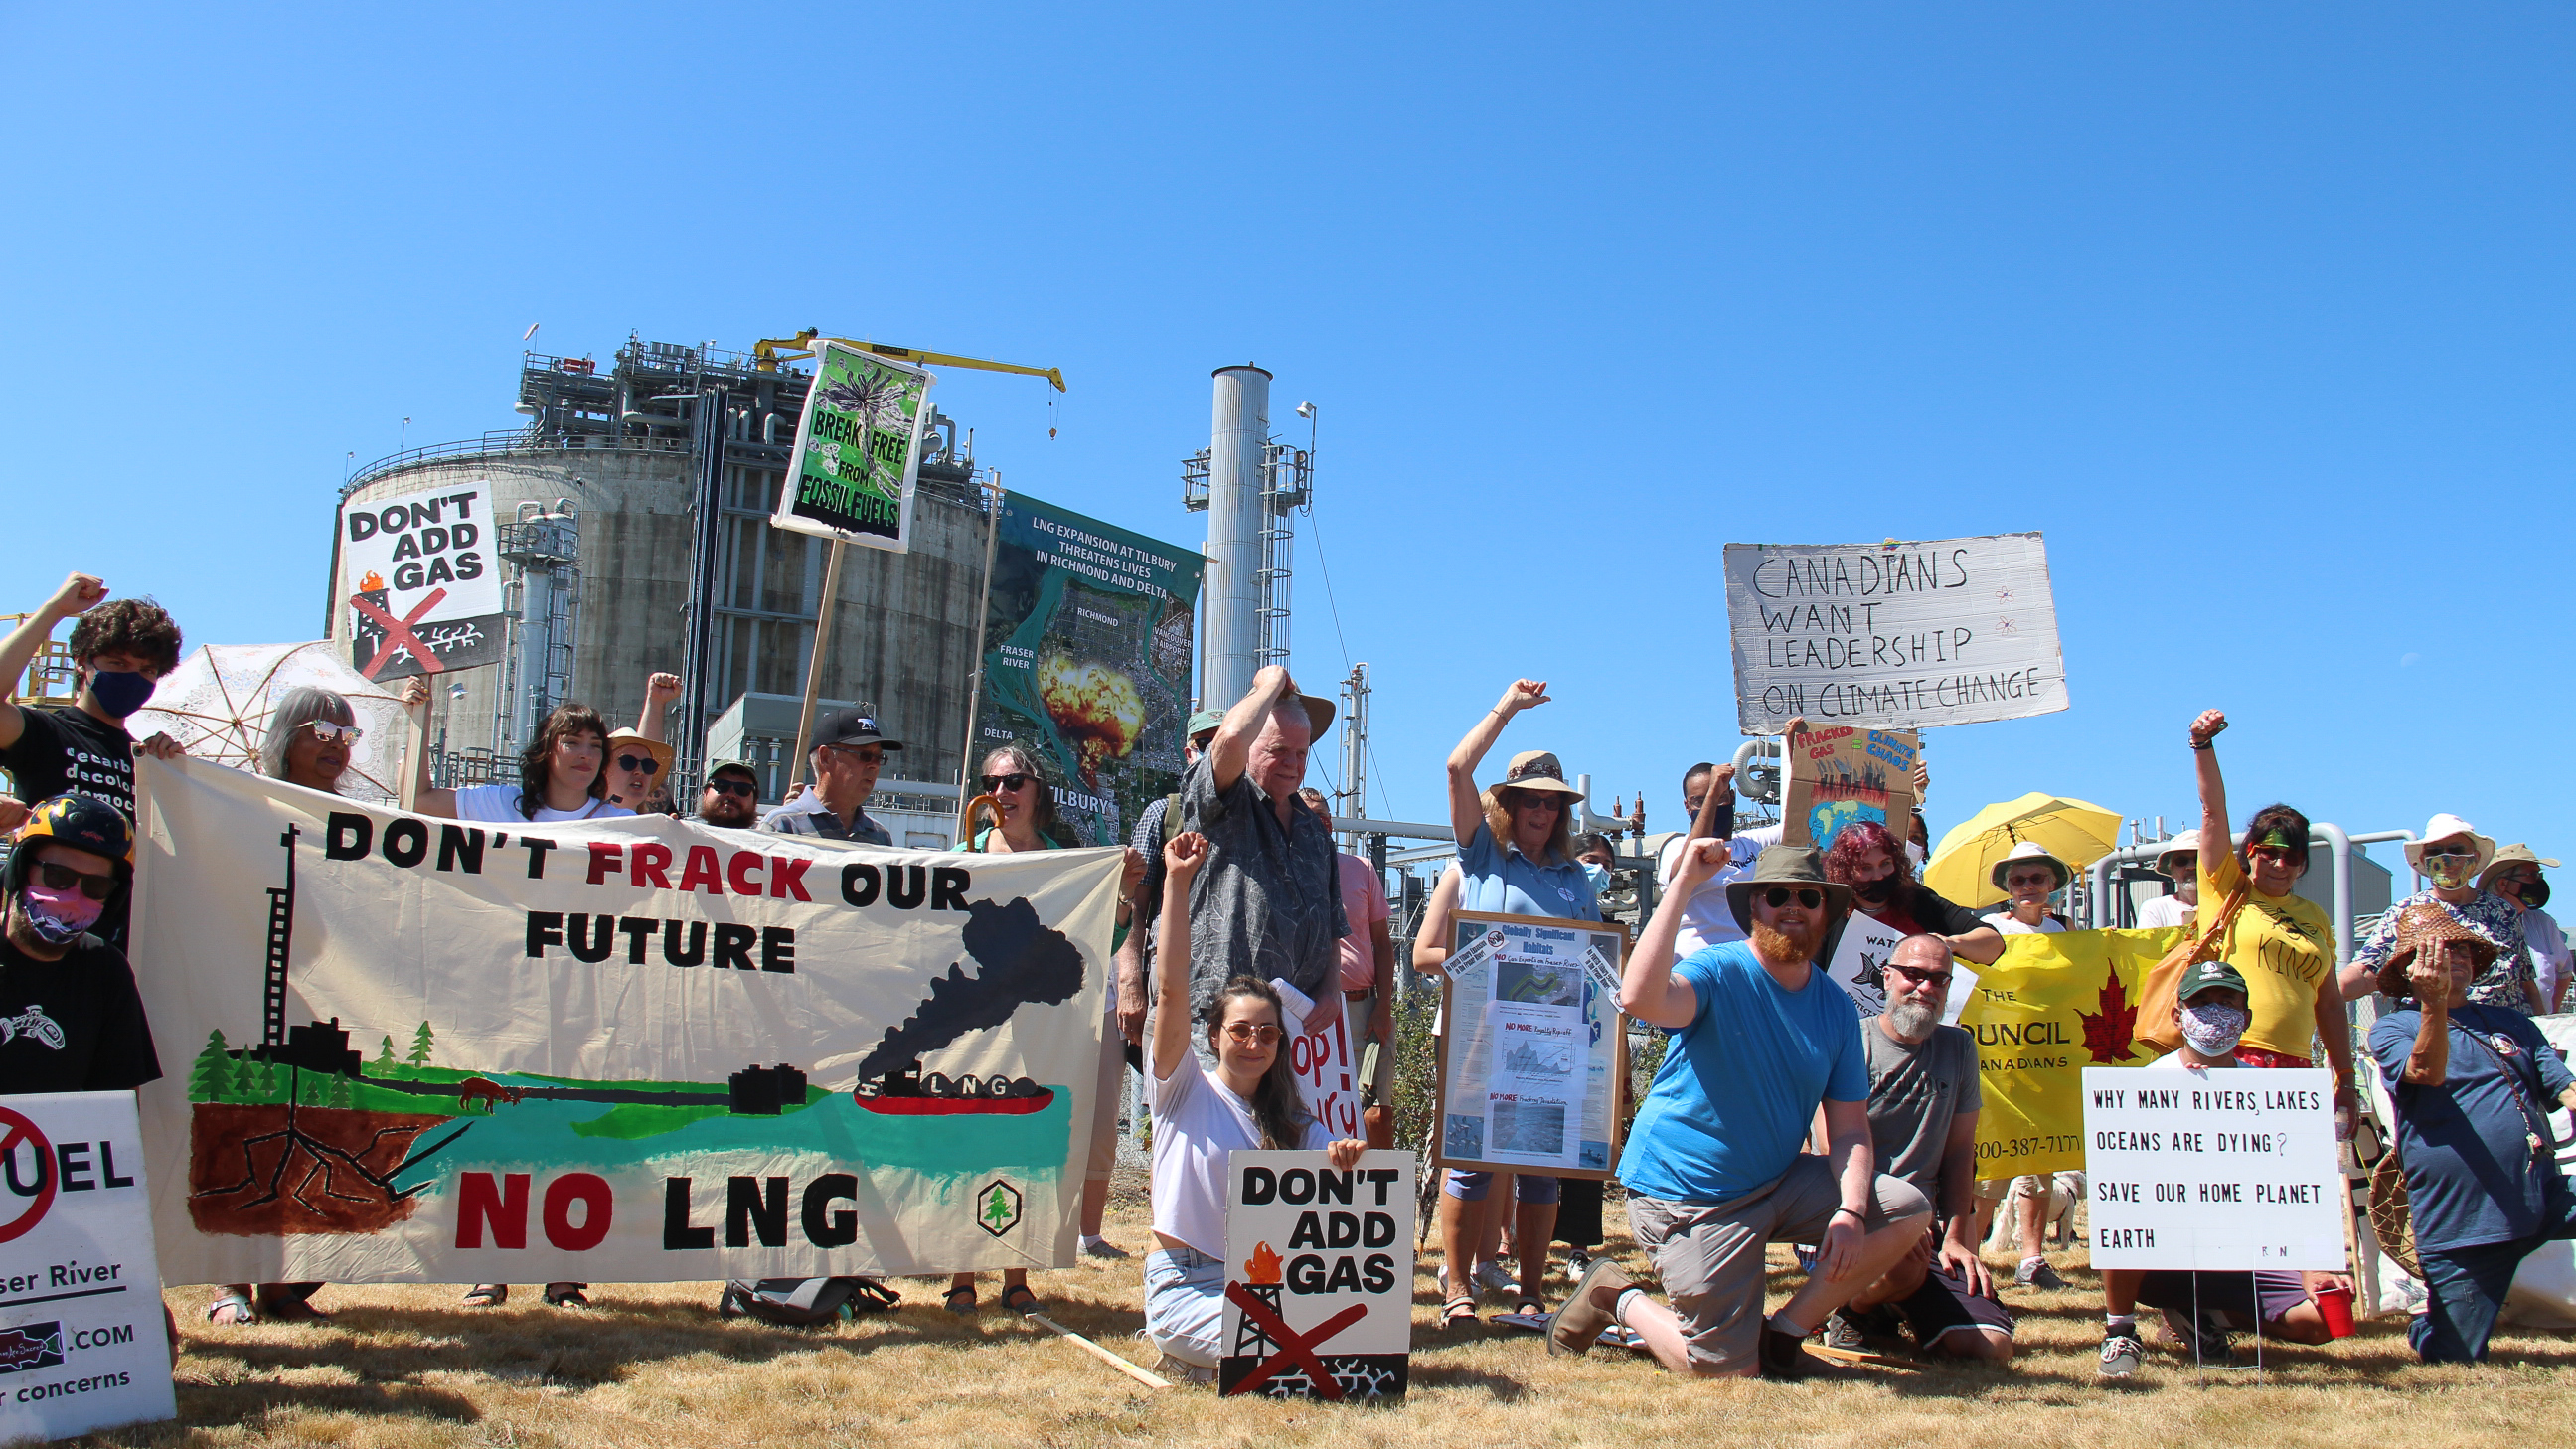 People protesting outside Tilbury LNG facility in Delta, BC. Their signs say "Don't frack our future, NO LNG" and "Don't add gas".